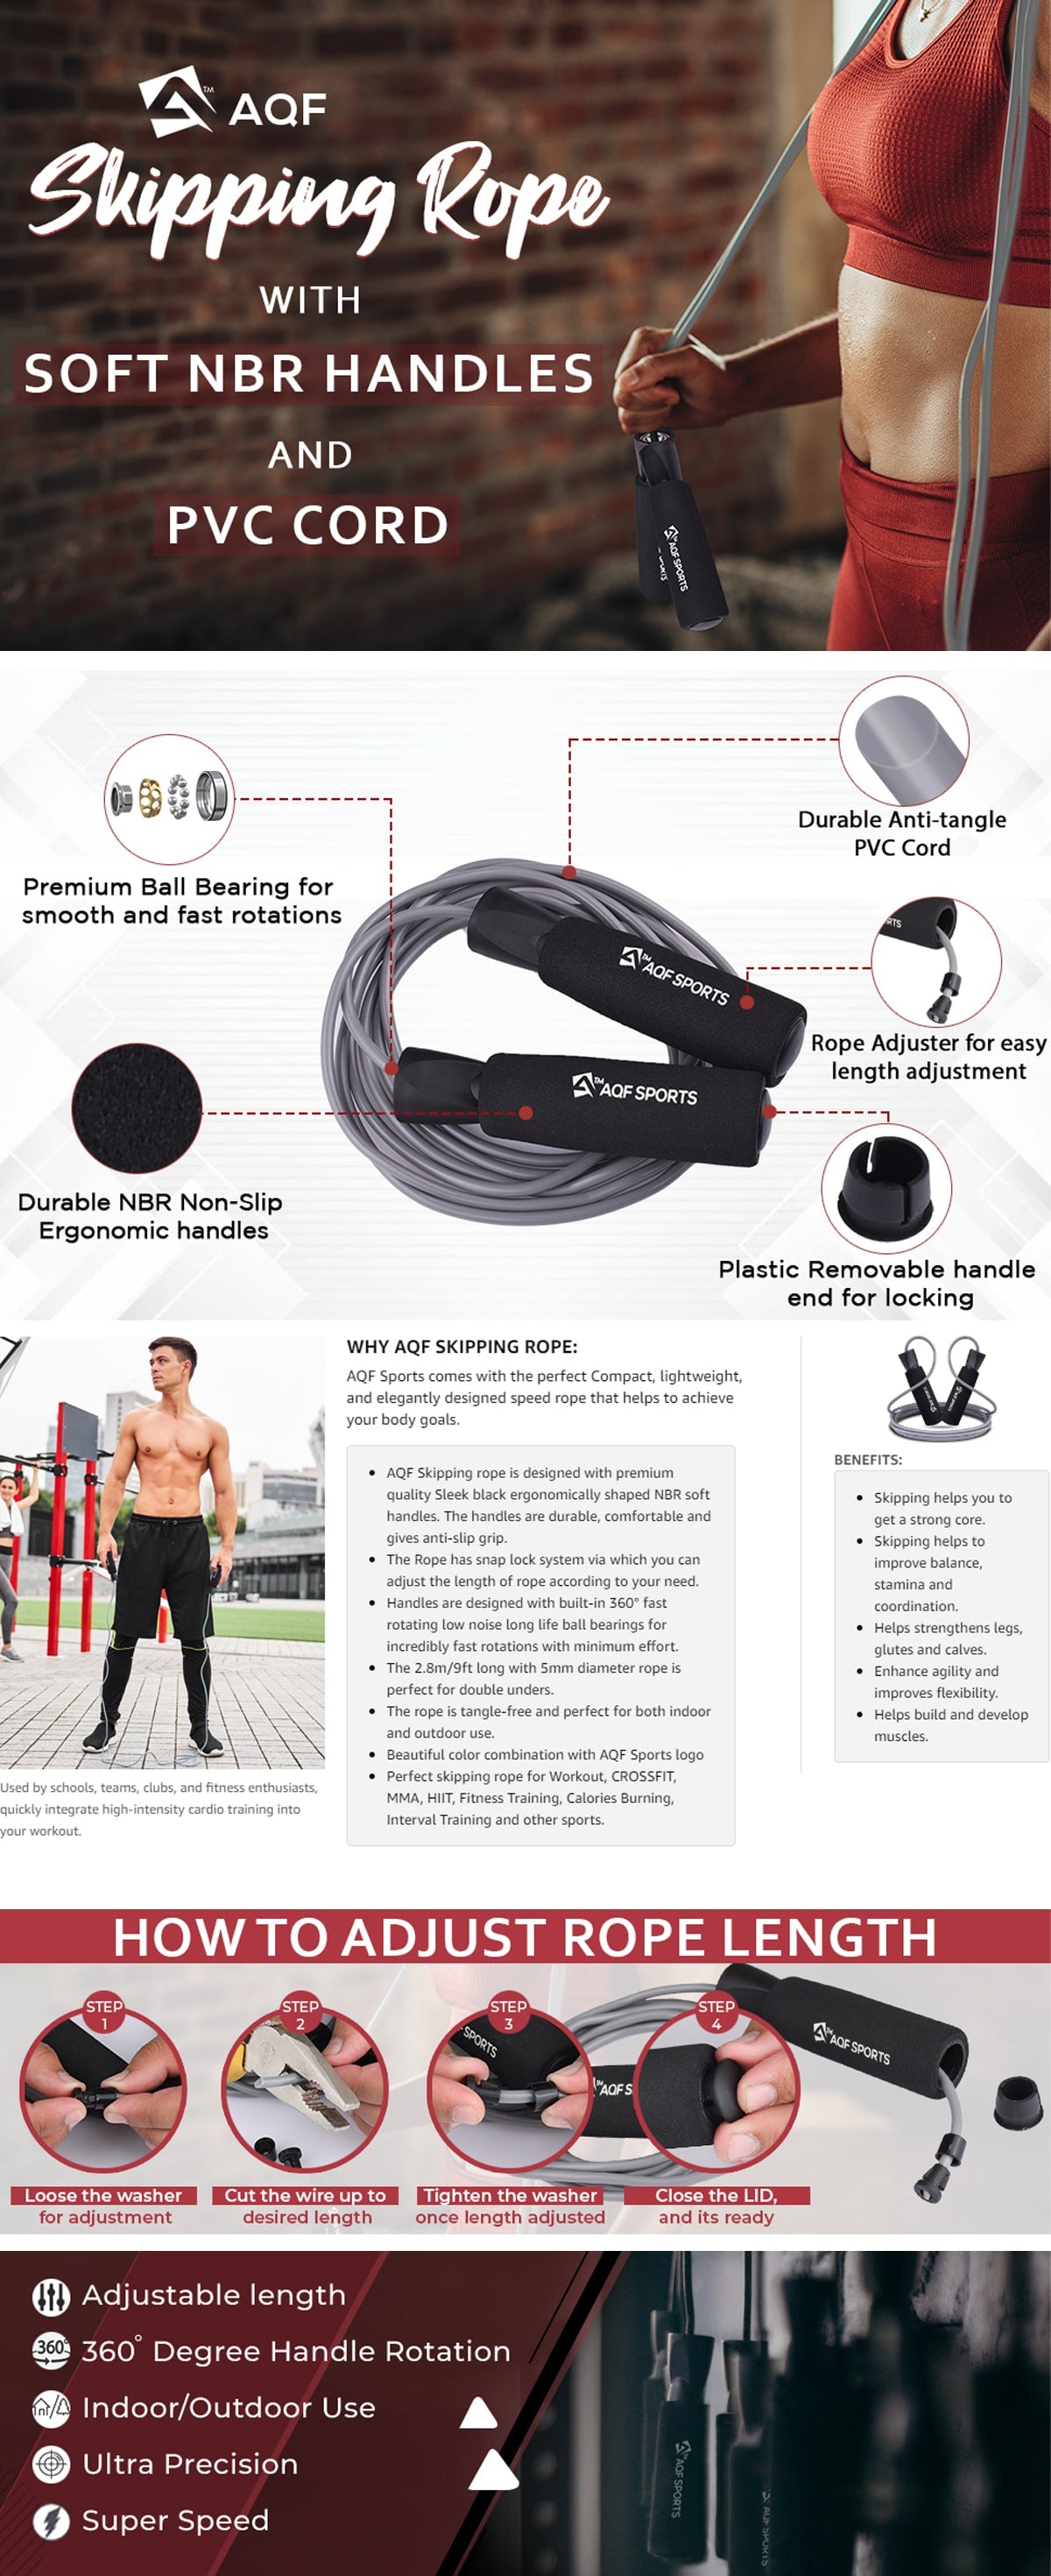 AQF Skipping Rope with Soft NBR Handles and PVC Cord